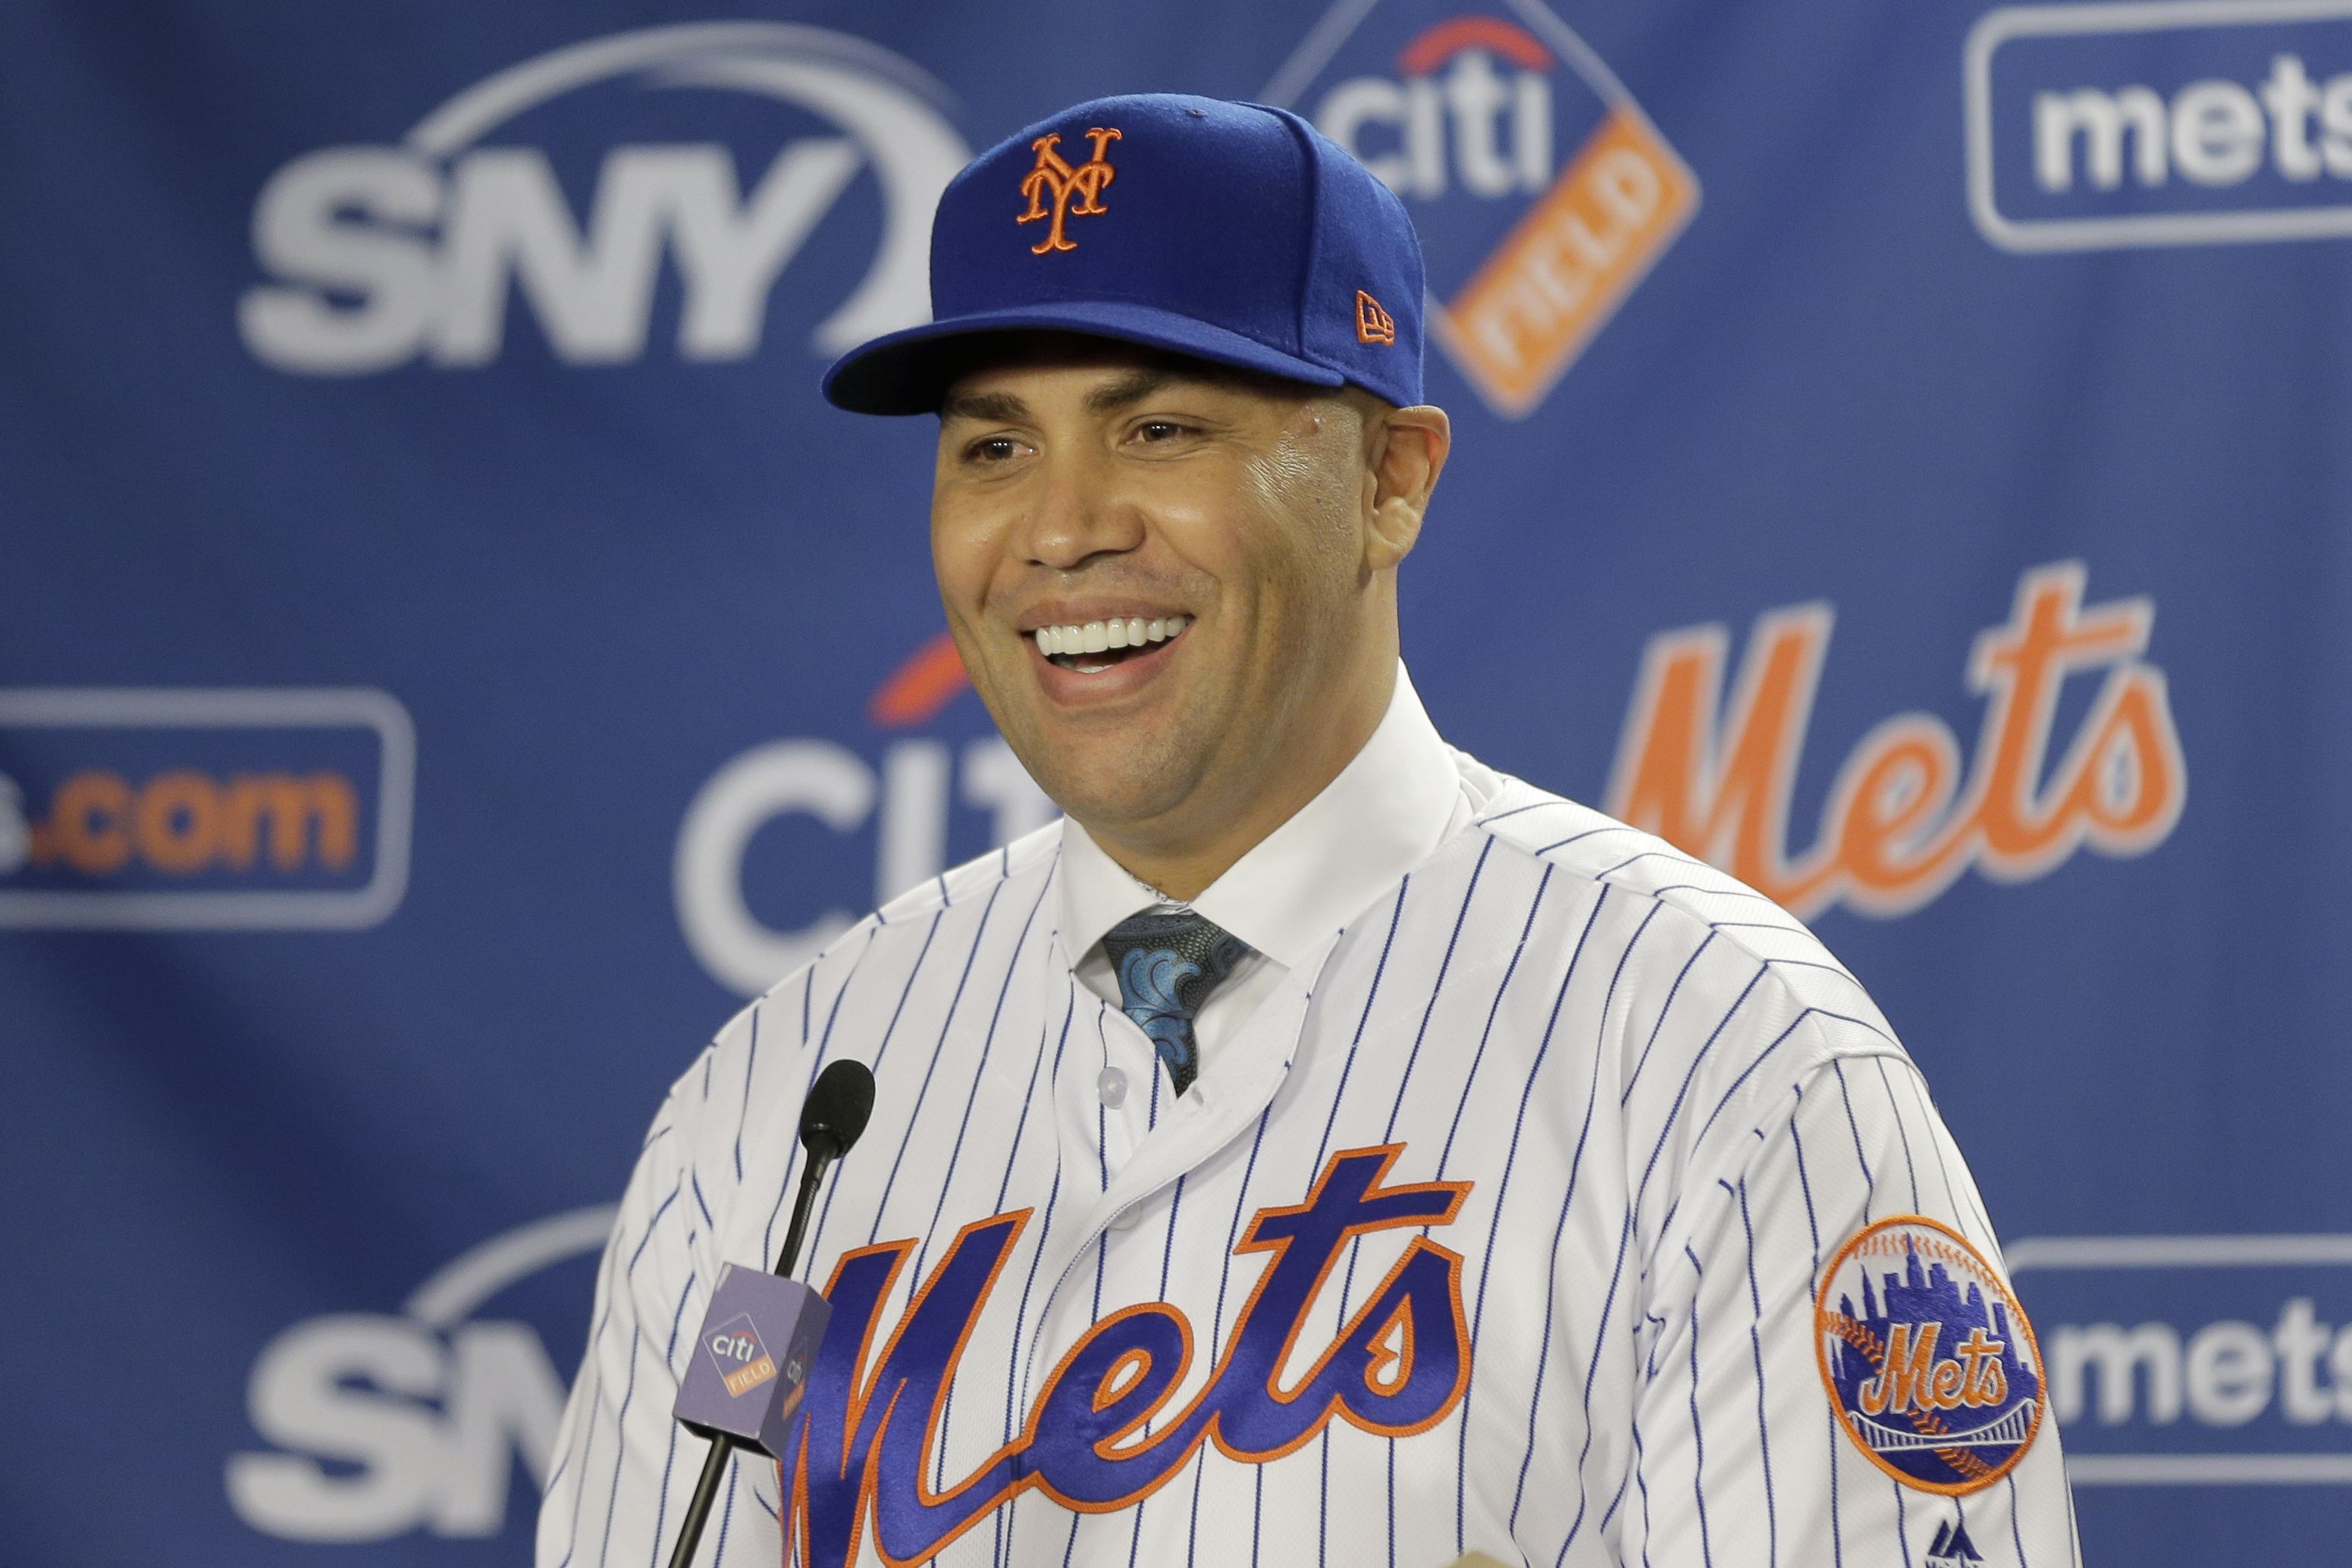 Carlos Beltran Returns to Houston, with a World Series in Mind